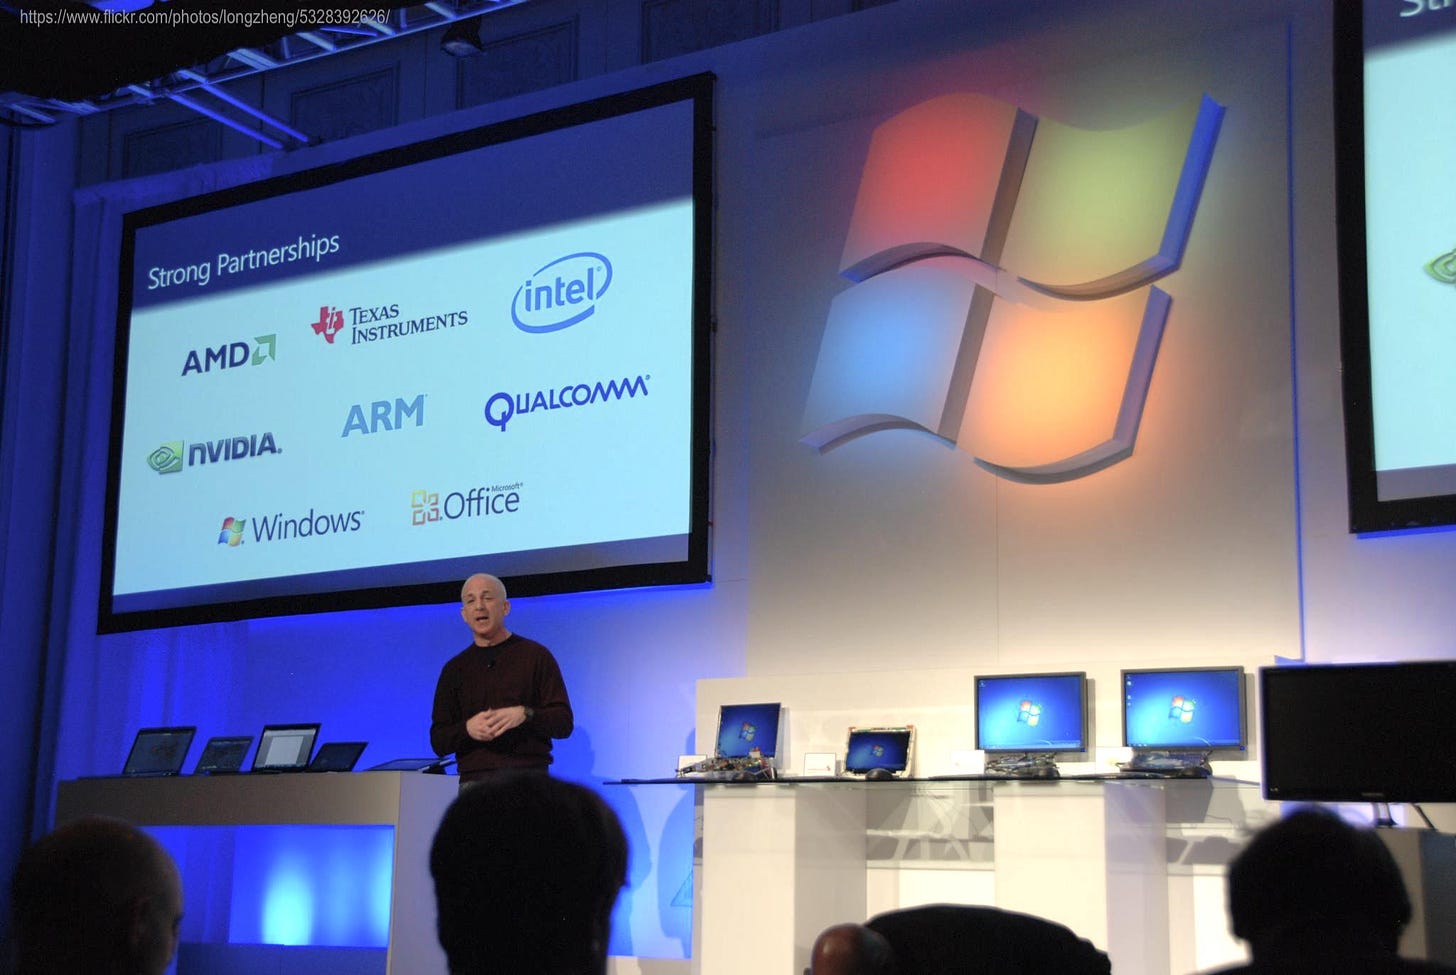 Event photo with author on stage showing a slide "Strong Partners" with logos from AMD, Texas Instruments, Intel, NVIDIA, ARM, Qualcomm, Windows, and Office.